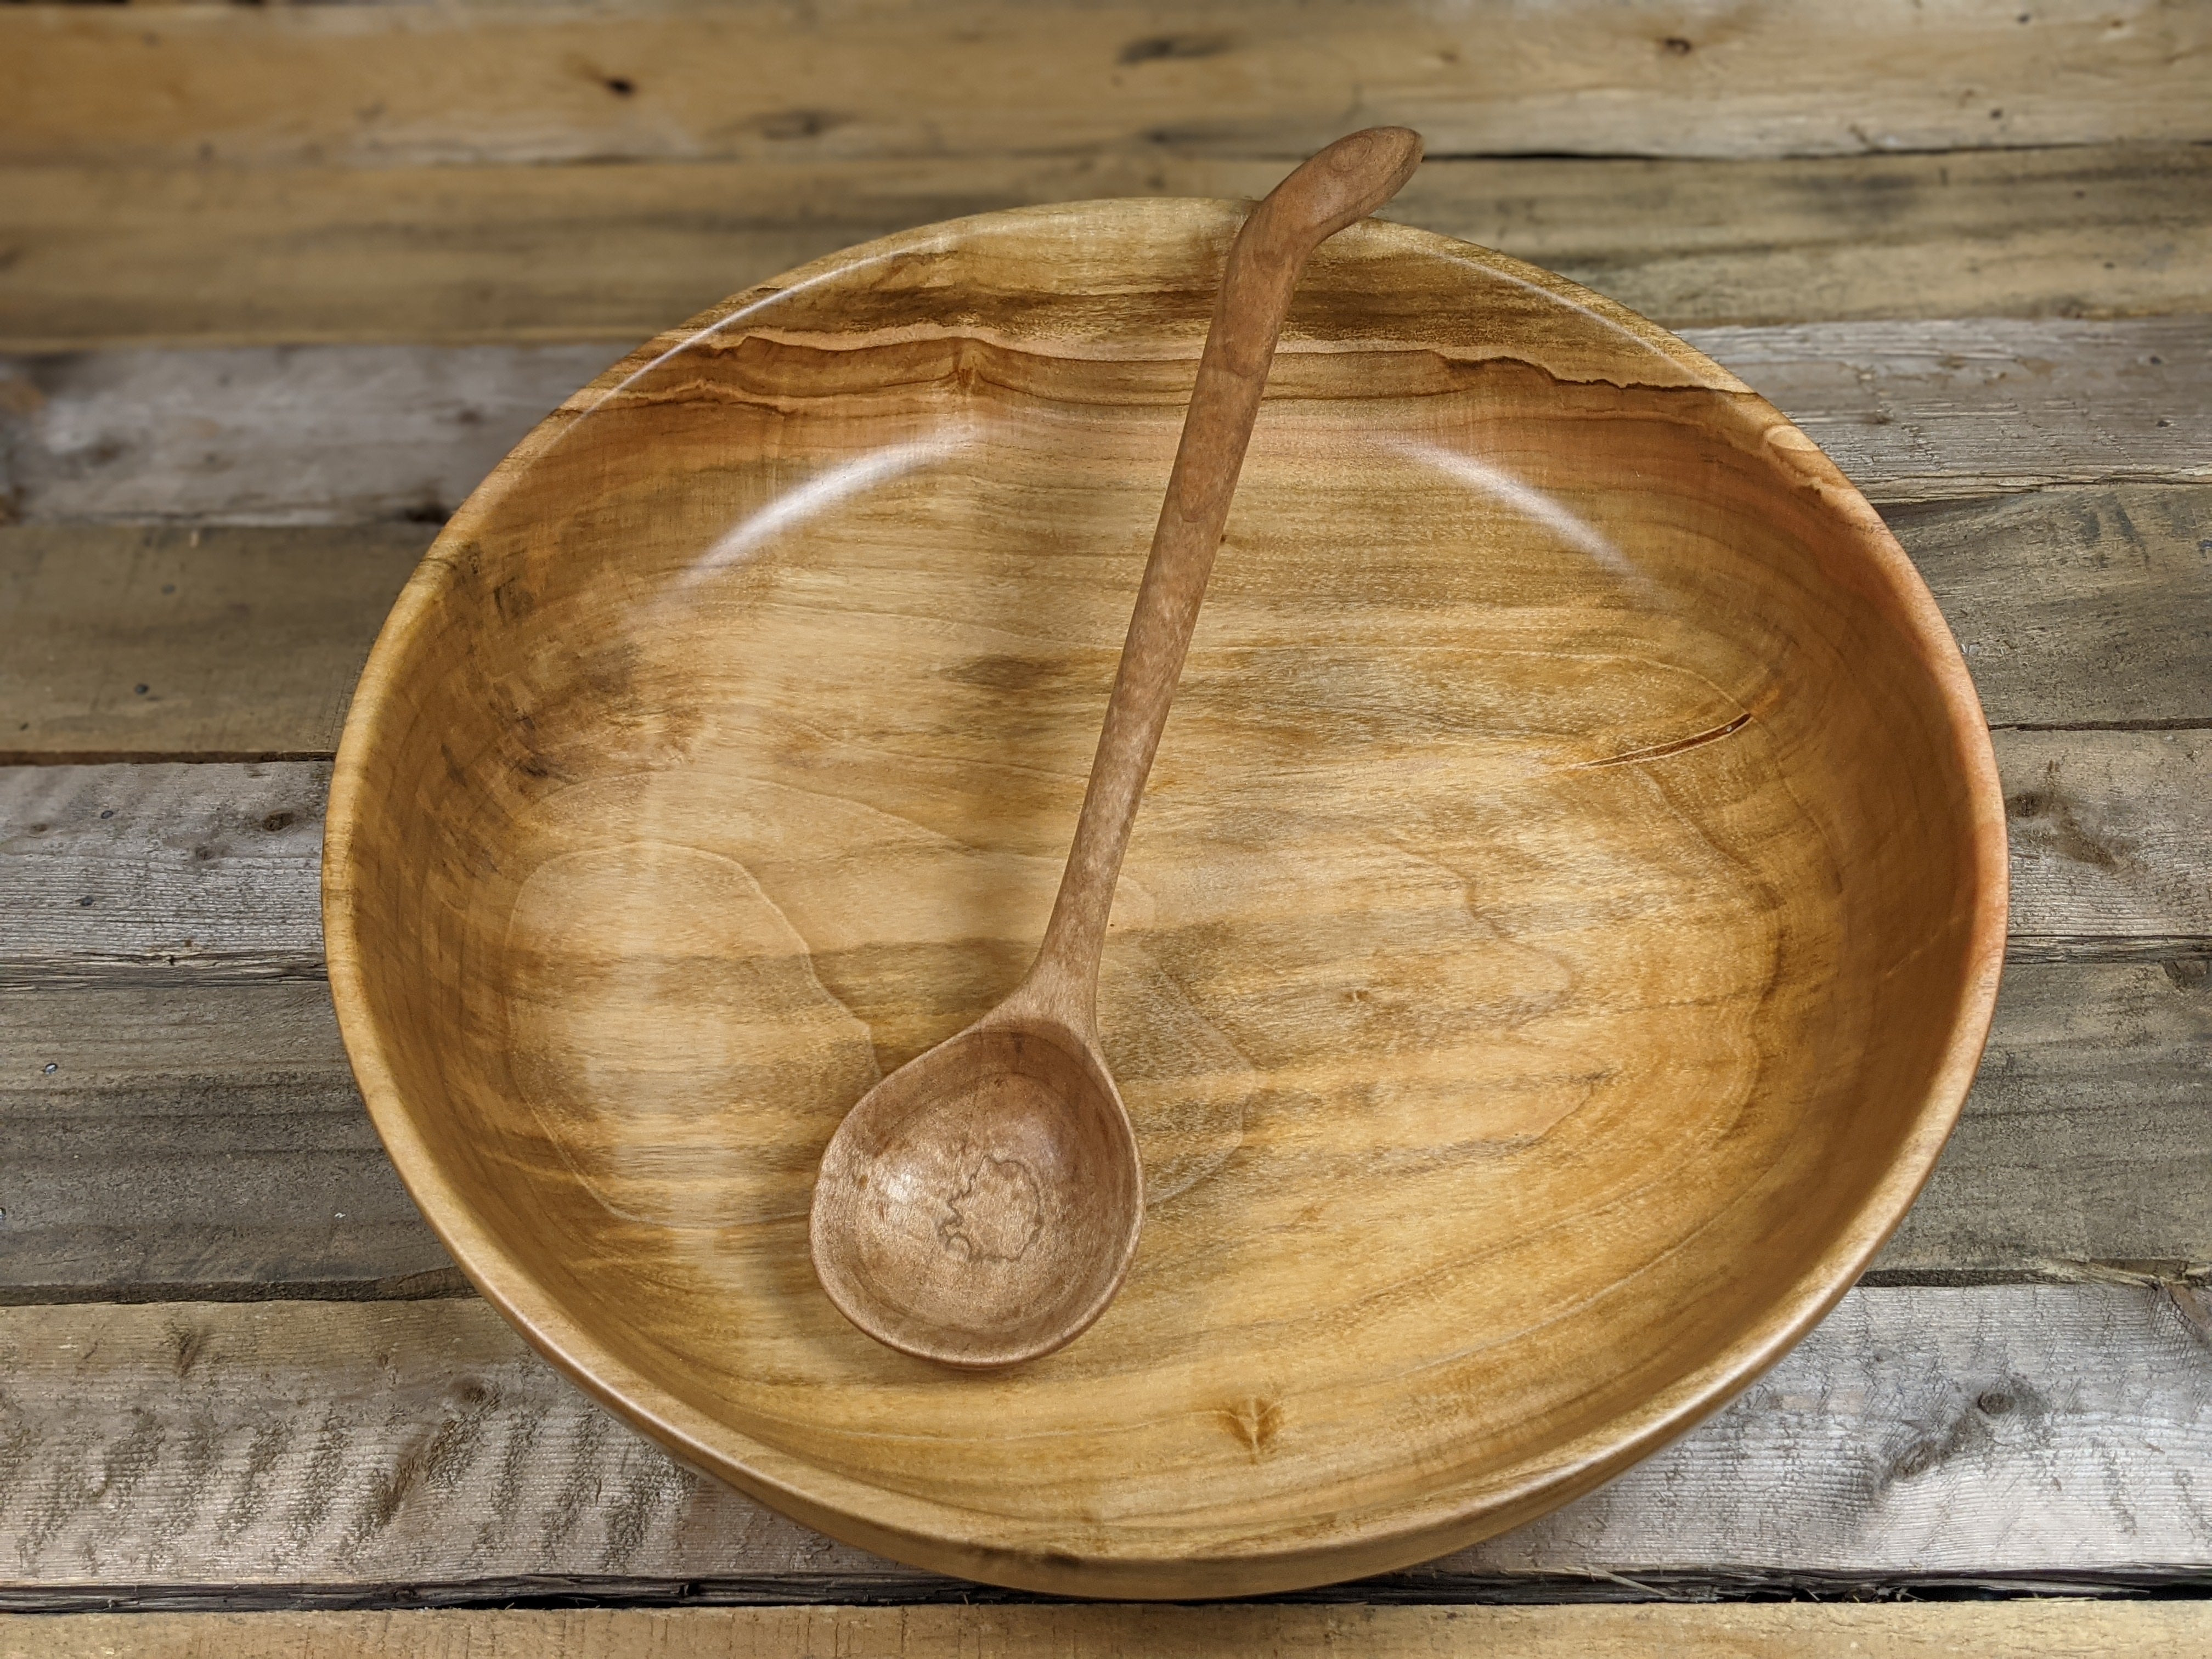 Silver maple salad bowl and serving spoon set